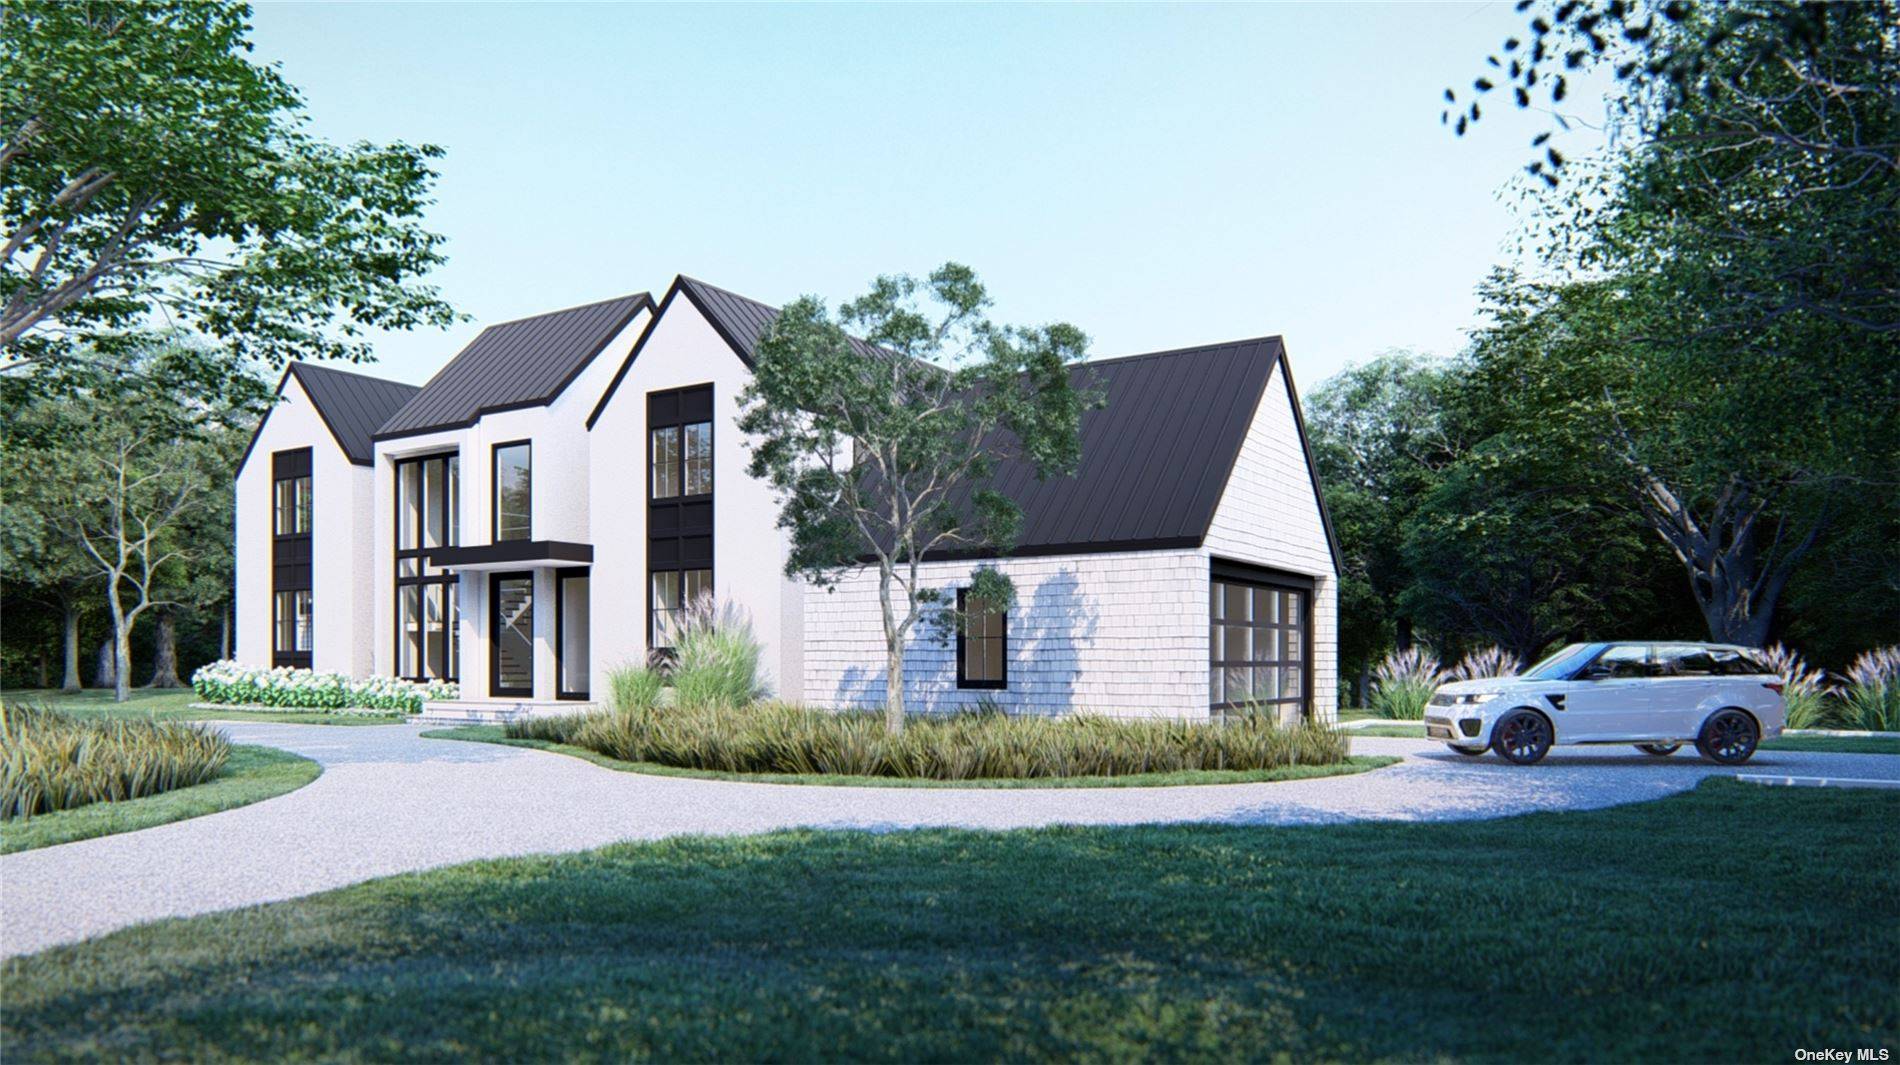 This exceptional brand new construction conveniently located on a quiet tree lined street one mile from Sag Harbor Village, will be ready for Summer 2022 !